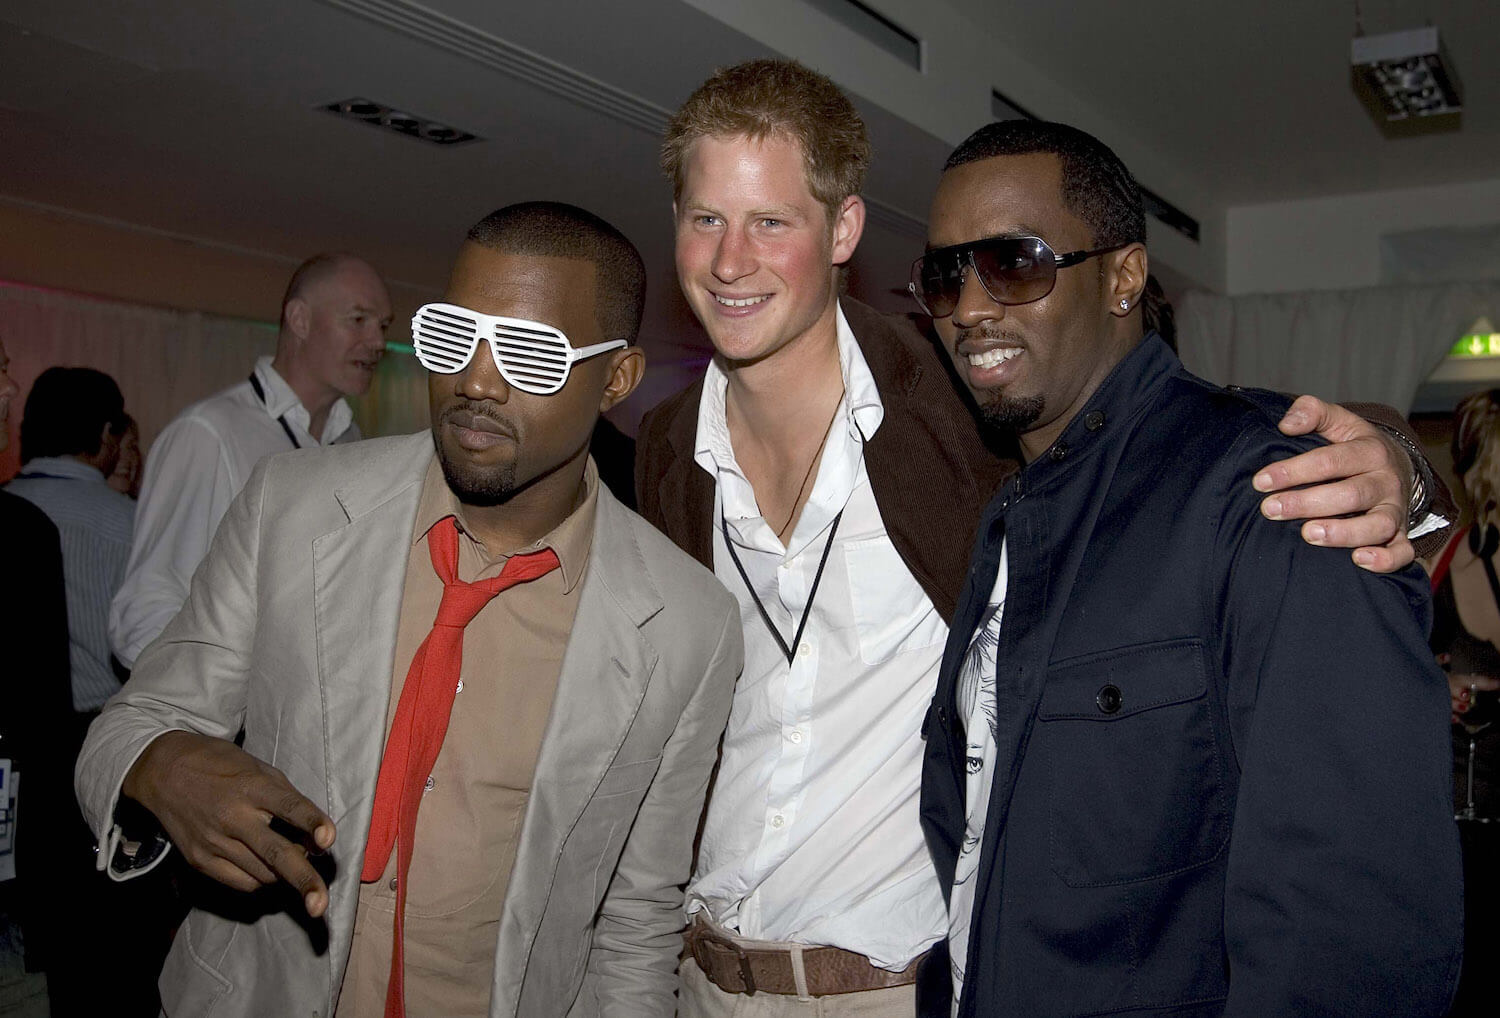 Prince Harry with Sean 'P. Diddy' Combs and Kanye West in 2007